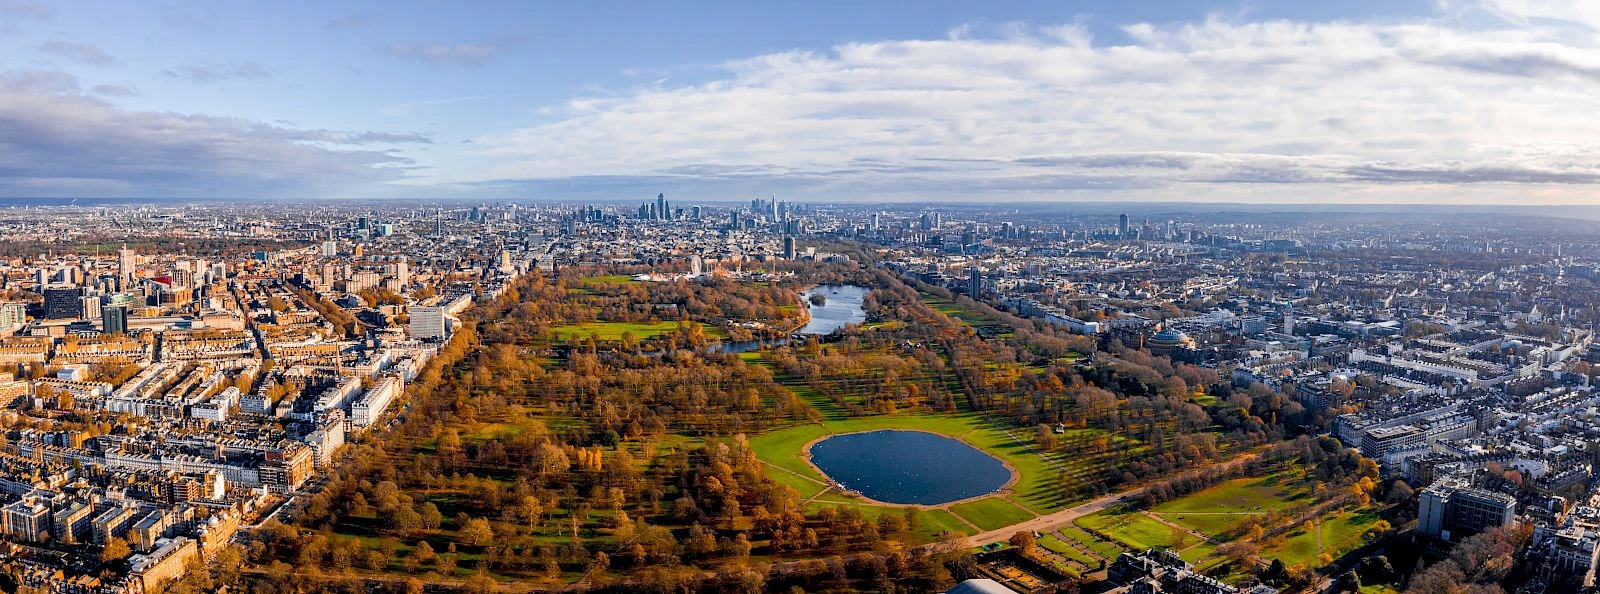 Often referred to as the ‘Lungs of London’, the capital’s parks are credited with providing vital breathing space to the surrounding urban sprawl. And none more so than central London’s largest green space, Hyde Park.